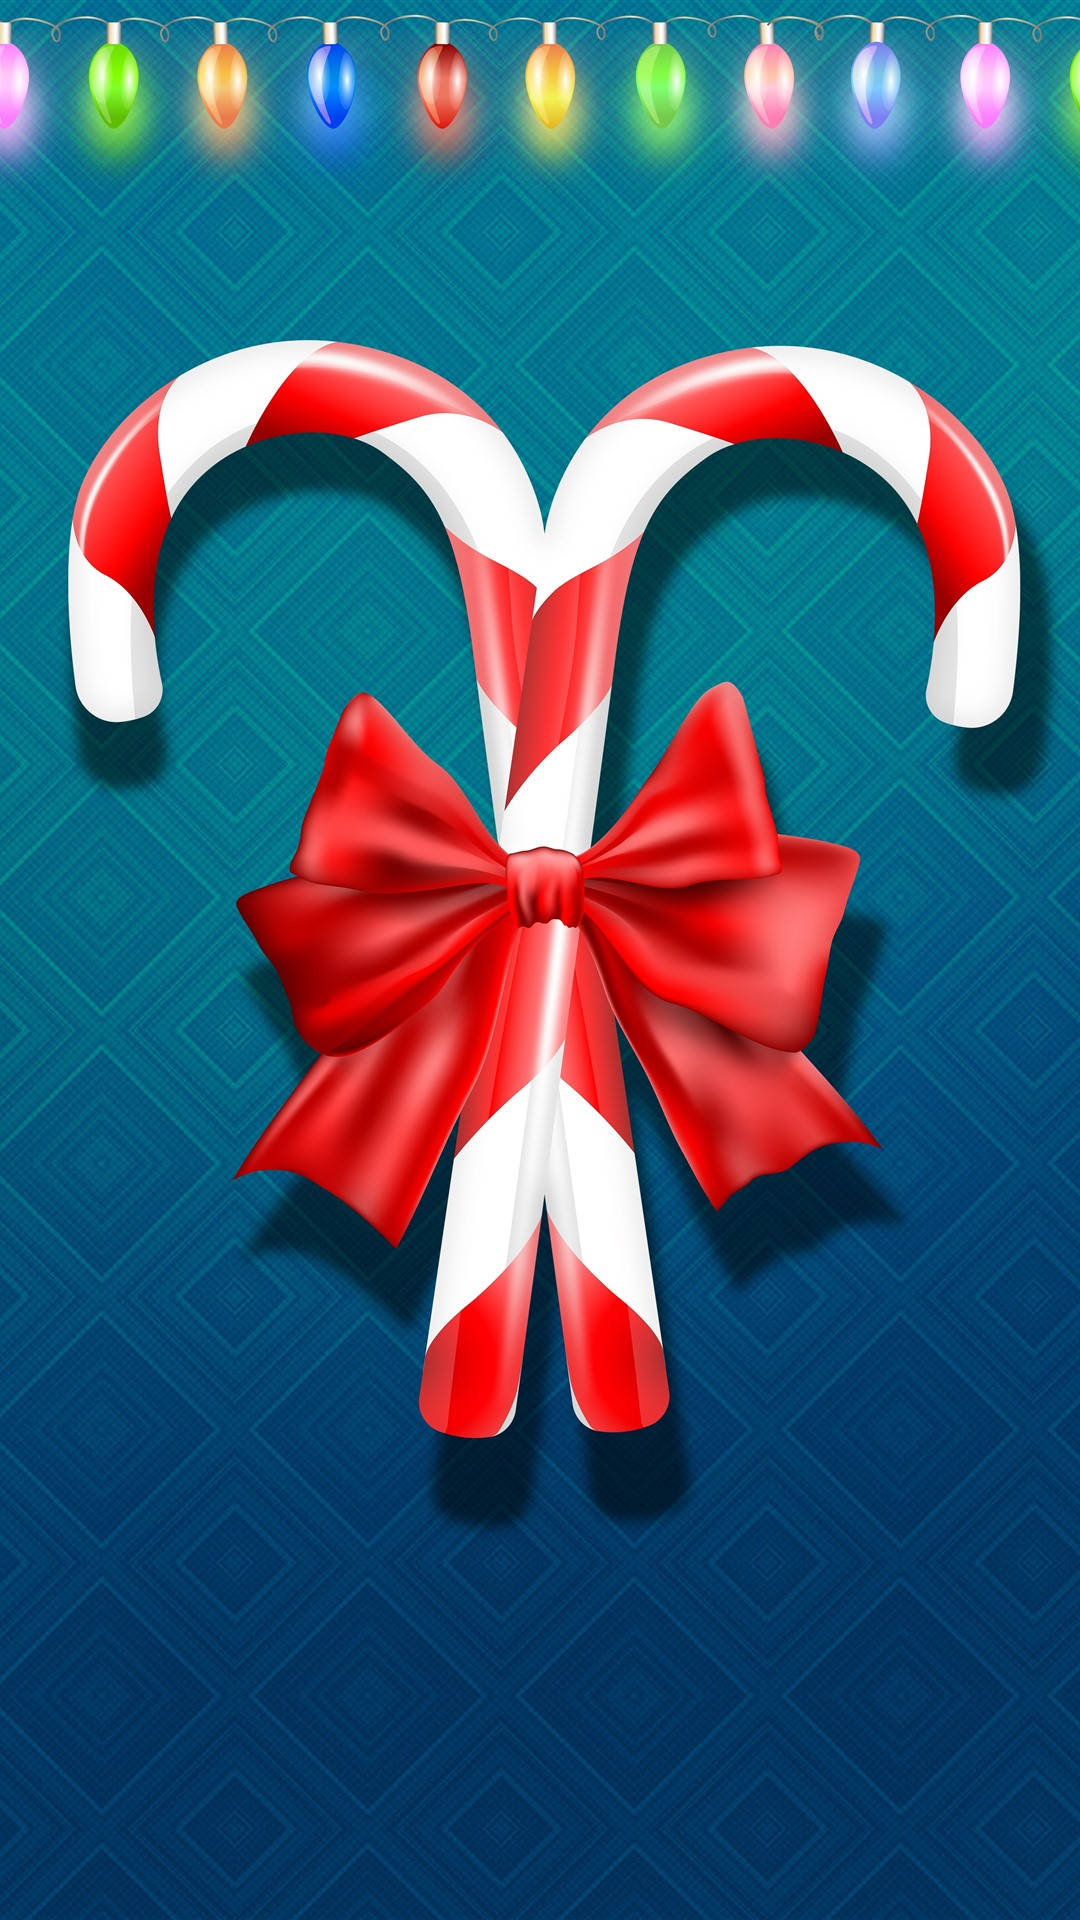 1080X1920 Candy Cane Wallpaper and Background